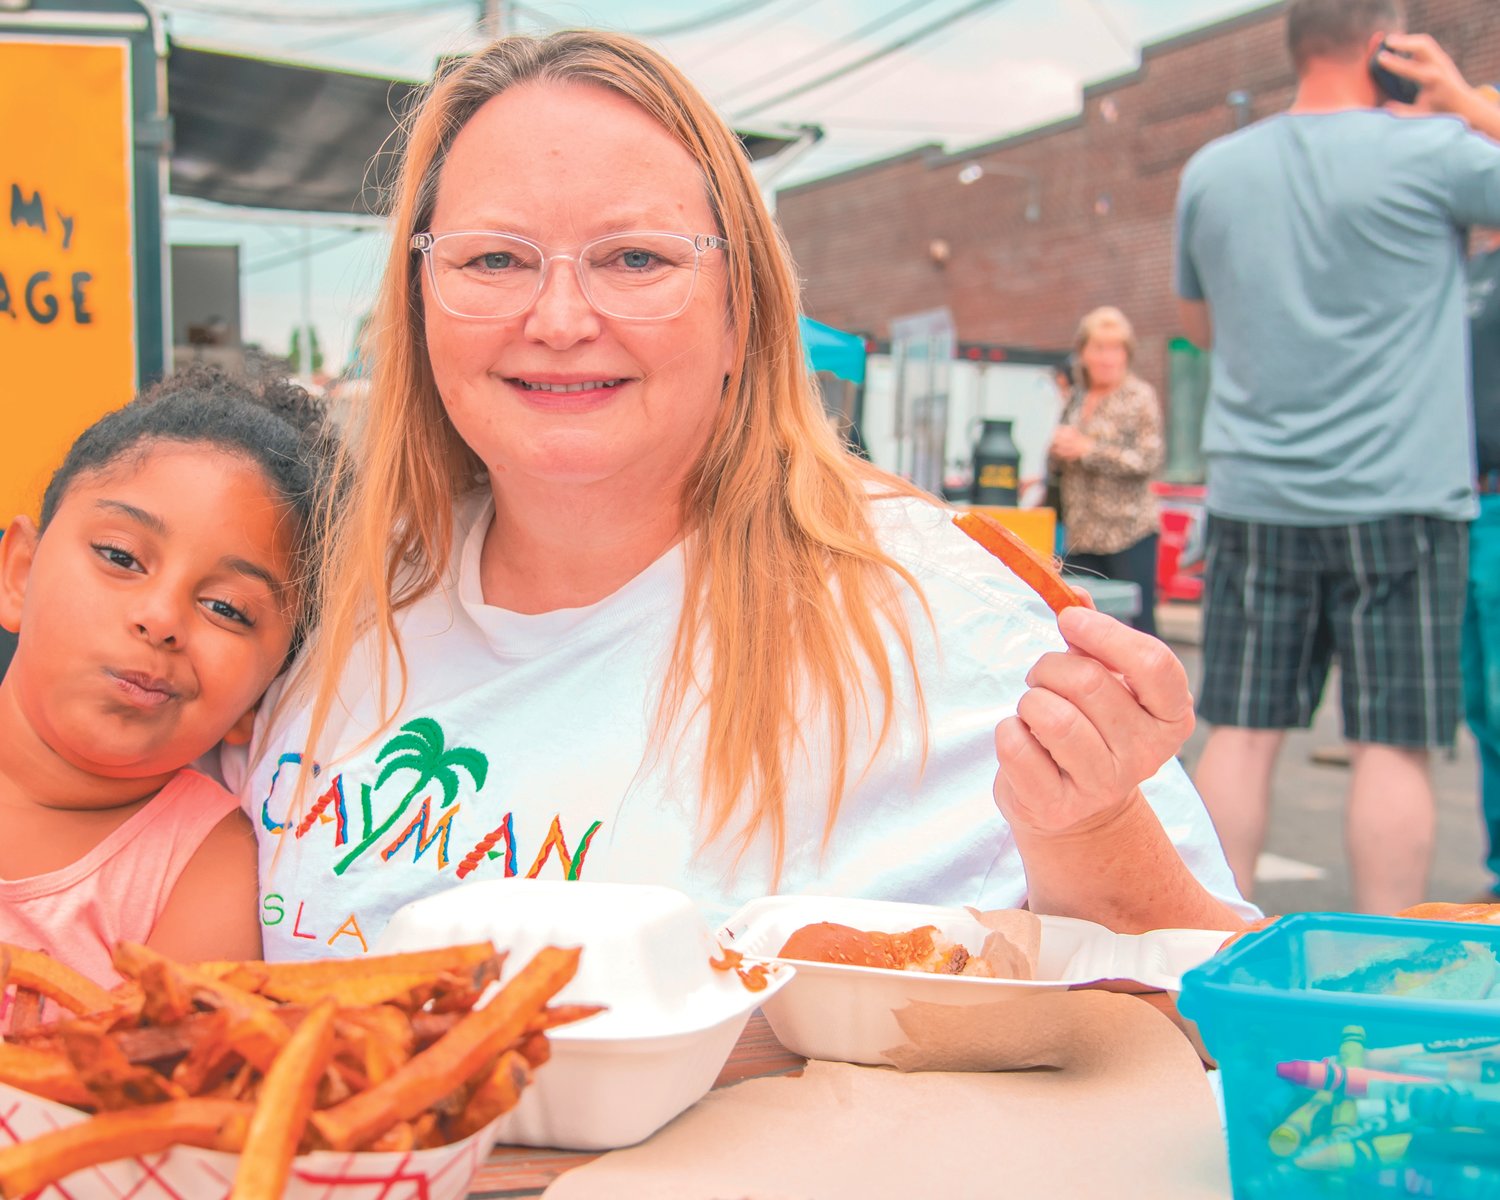 Laverda Hartley, right, smiles and poses for a photo with Chloe Blount while enjoying food during ChehalisFest on Saturday.